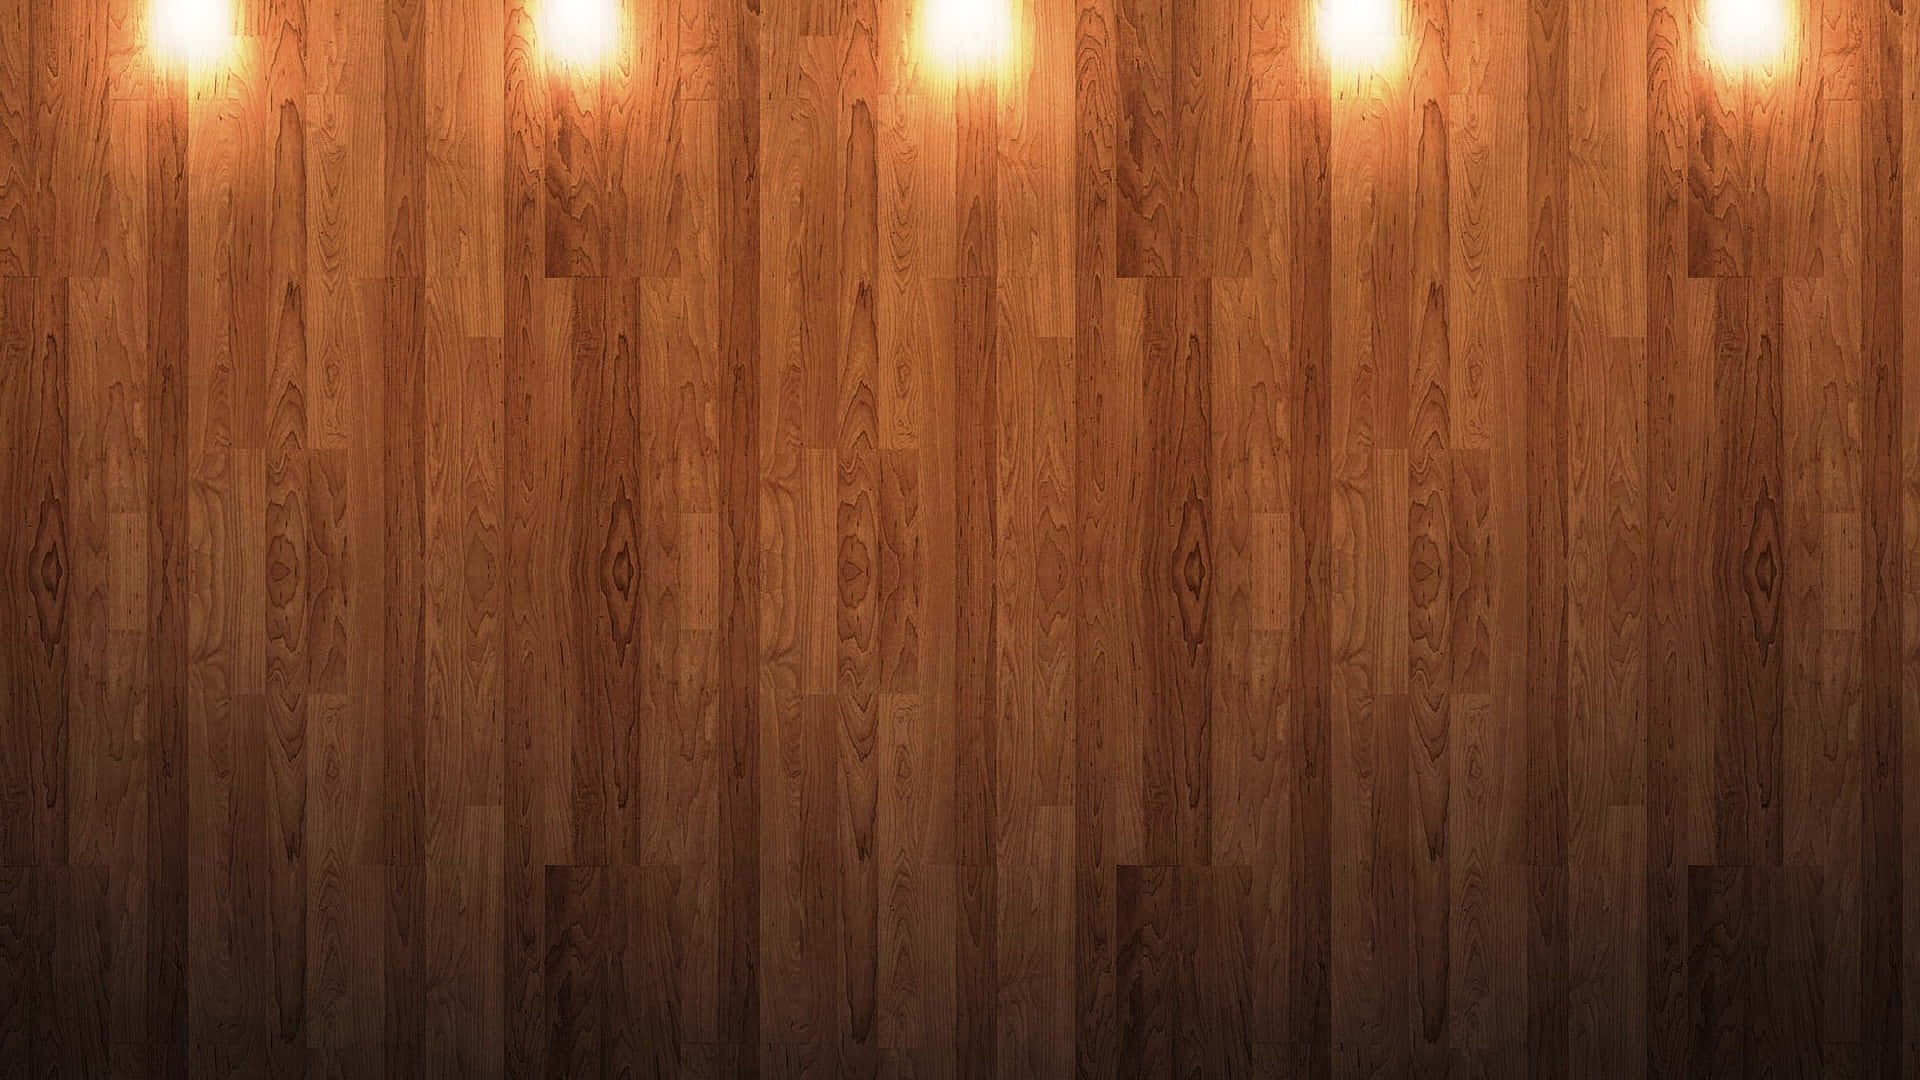 Brightly Lit Wooden Plank Background Wallpaper